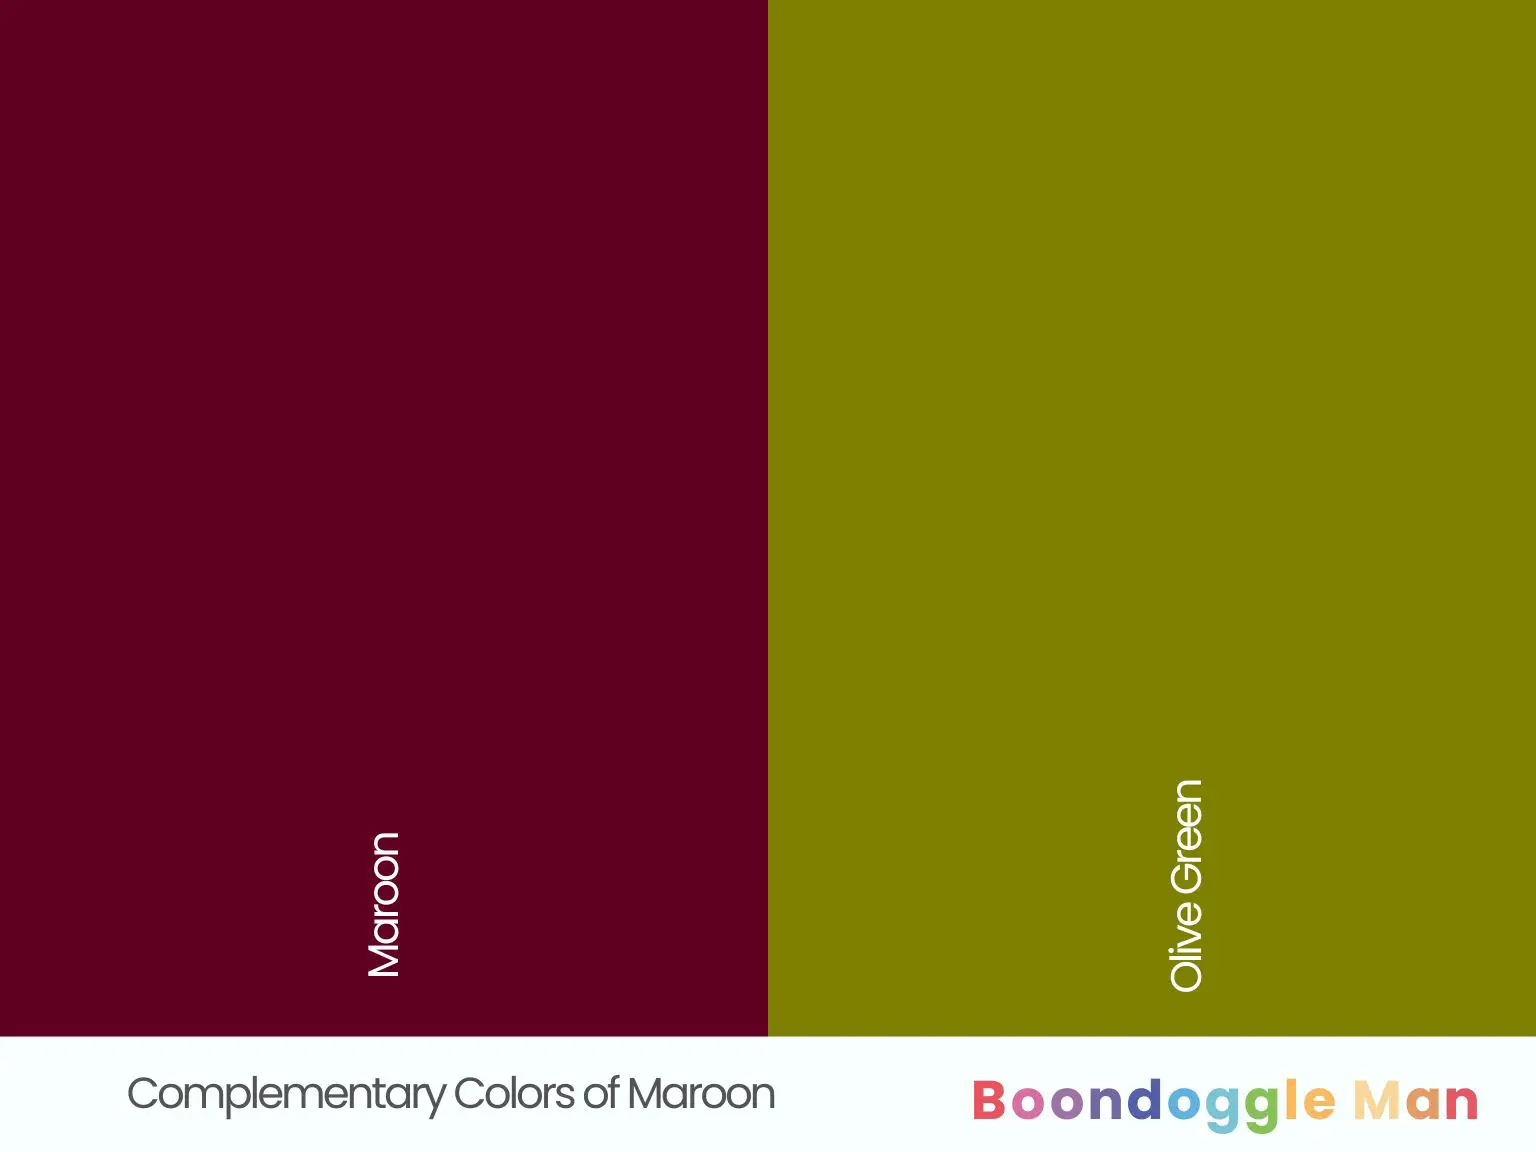 Complementary Colors of Maroon